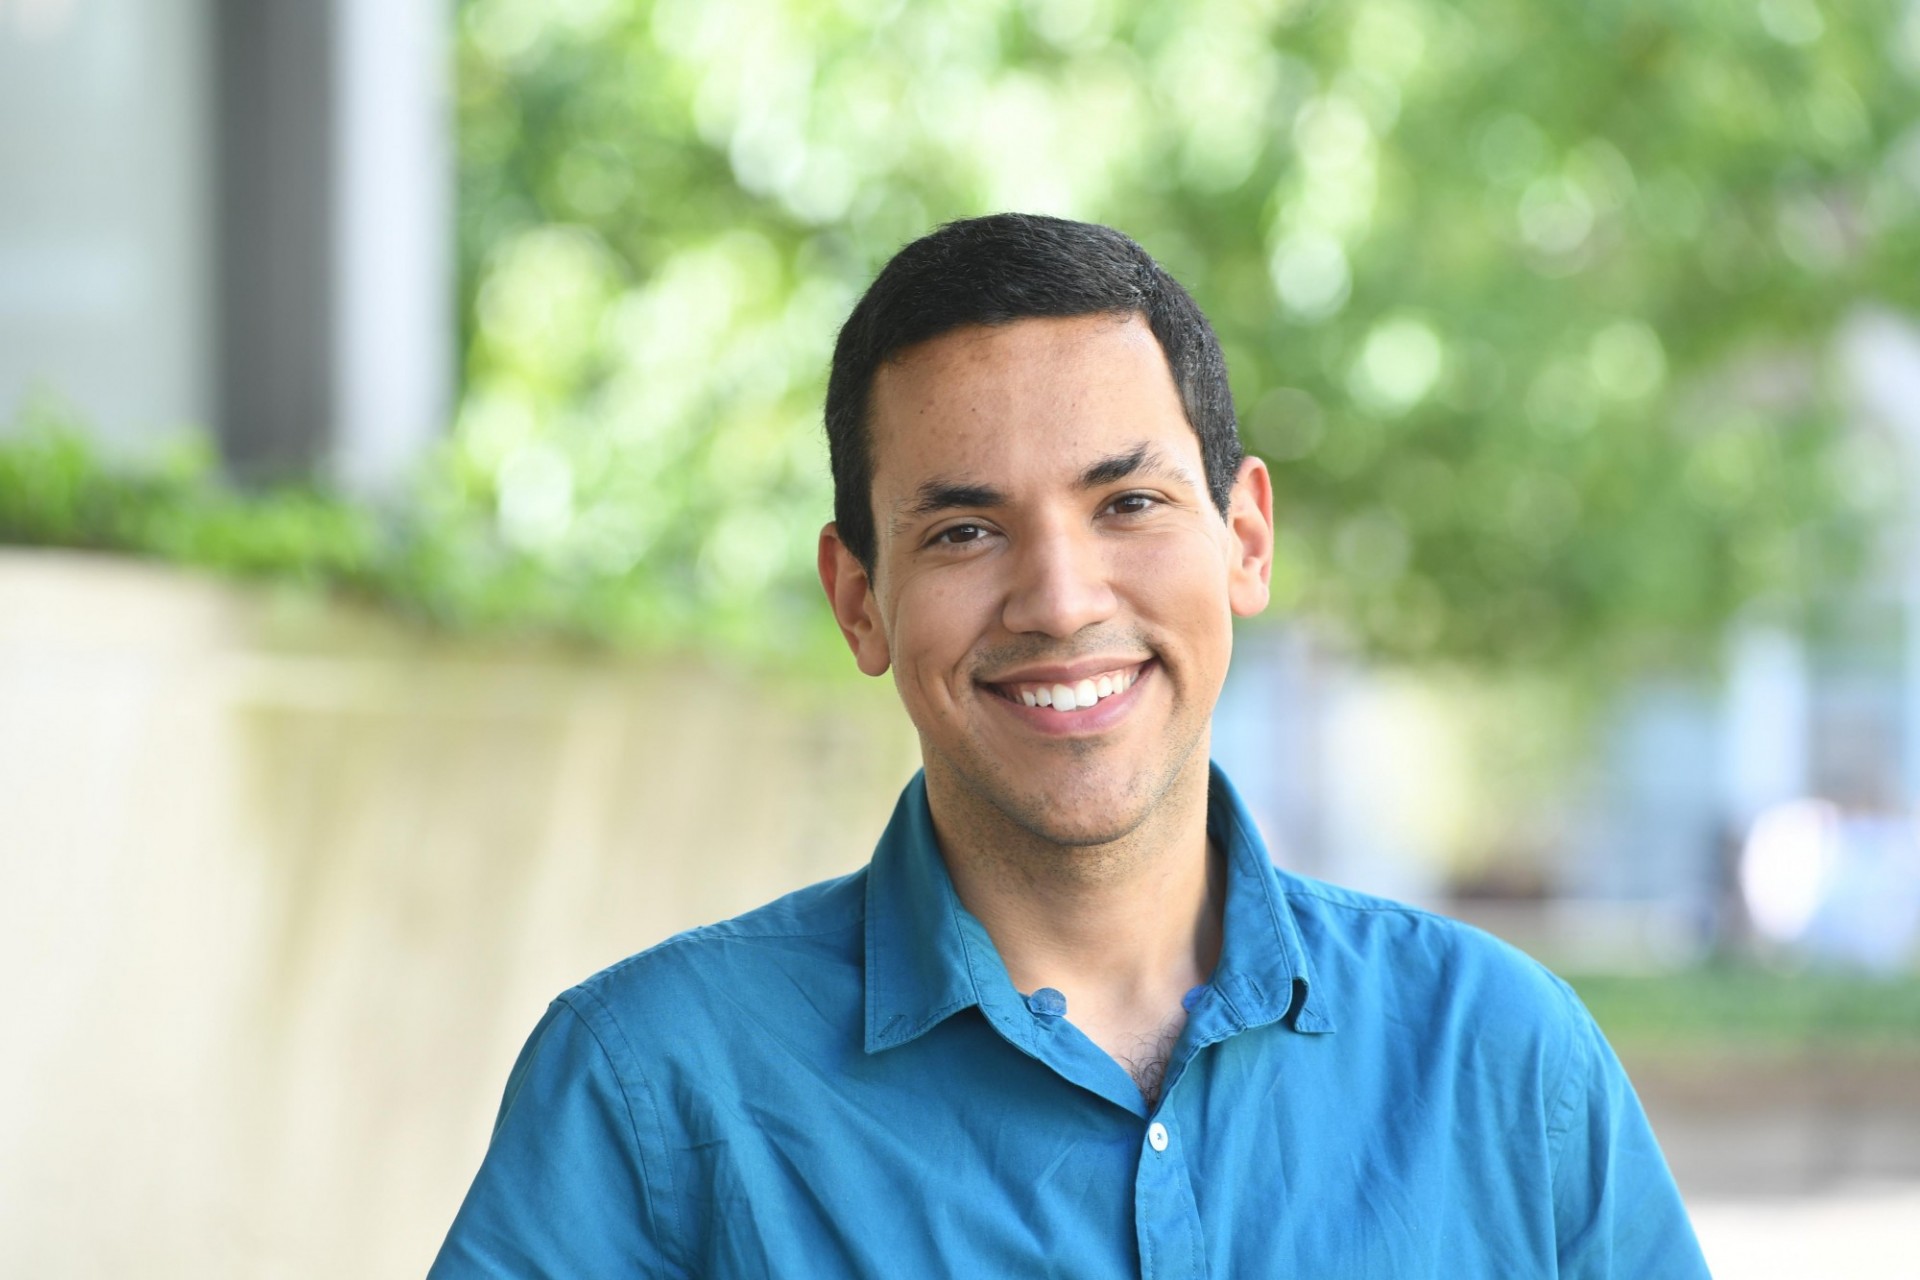 Portrait of Brandon Agosto, a young latino male with short hair, wearing a blue shirt against a green outdoor faded background